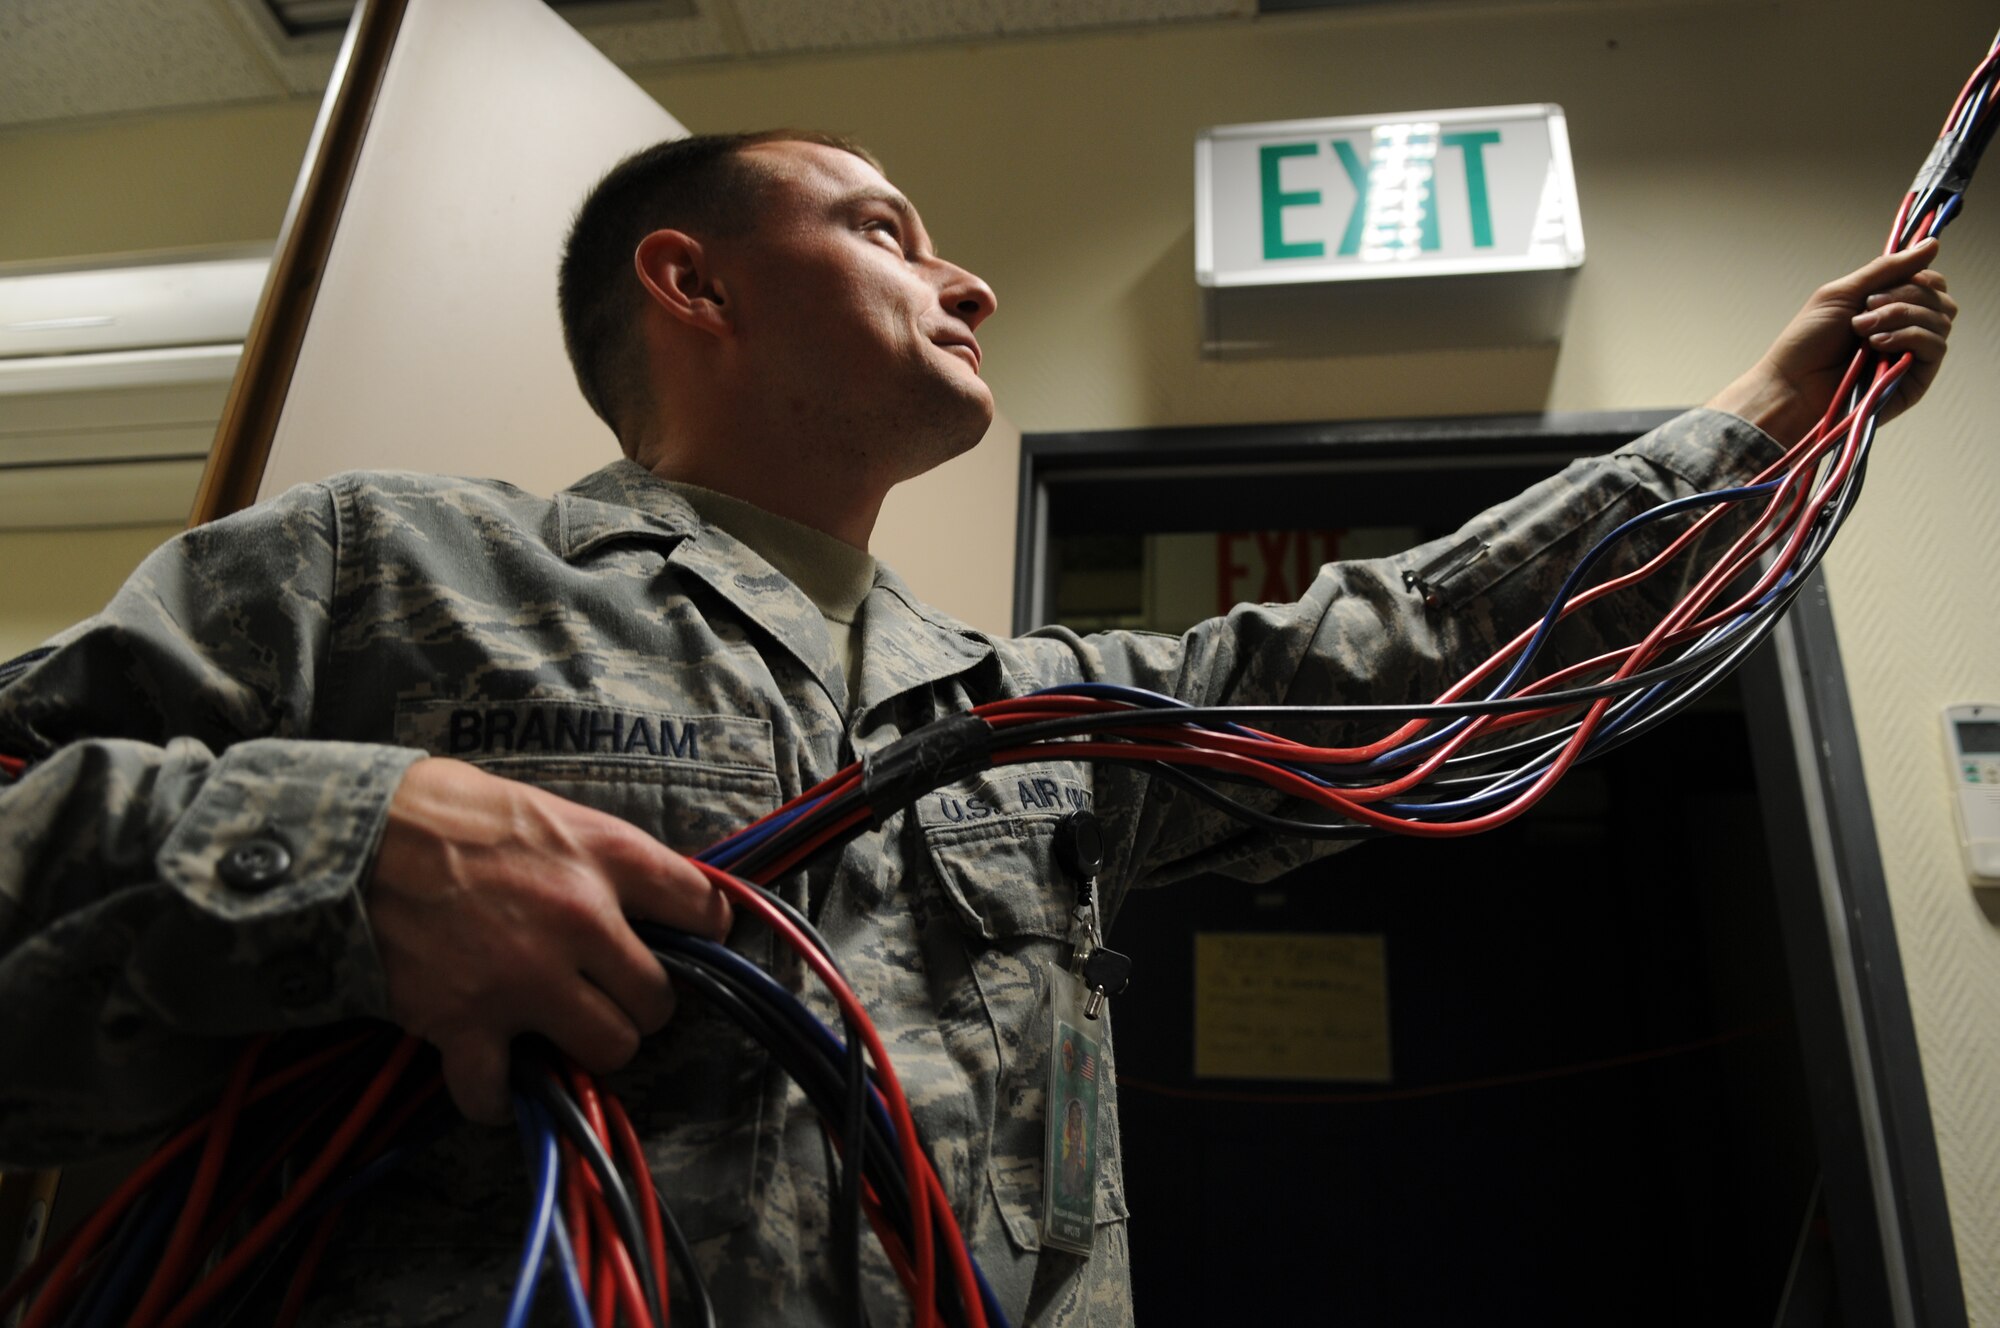 Tech. Sgt. William Branham, Warrior Preparation Center network infrastructure technician, helps remove network cable as part of a renovation project to the WPC. The WPC is a training compound for U.S. and coalition forces that provides live, virtual and constructive environments that are seen in downrange. The renovation is aimed at improving its network infrastructure and customer service, saving nearly a quarter of a million dollars annually thus far. (U.S. Air Force photo by 2nd Lt. Christopher Diaz) 
